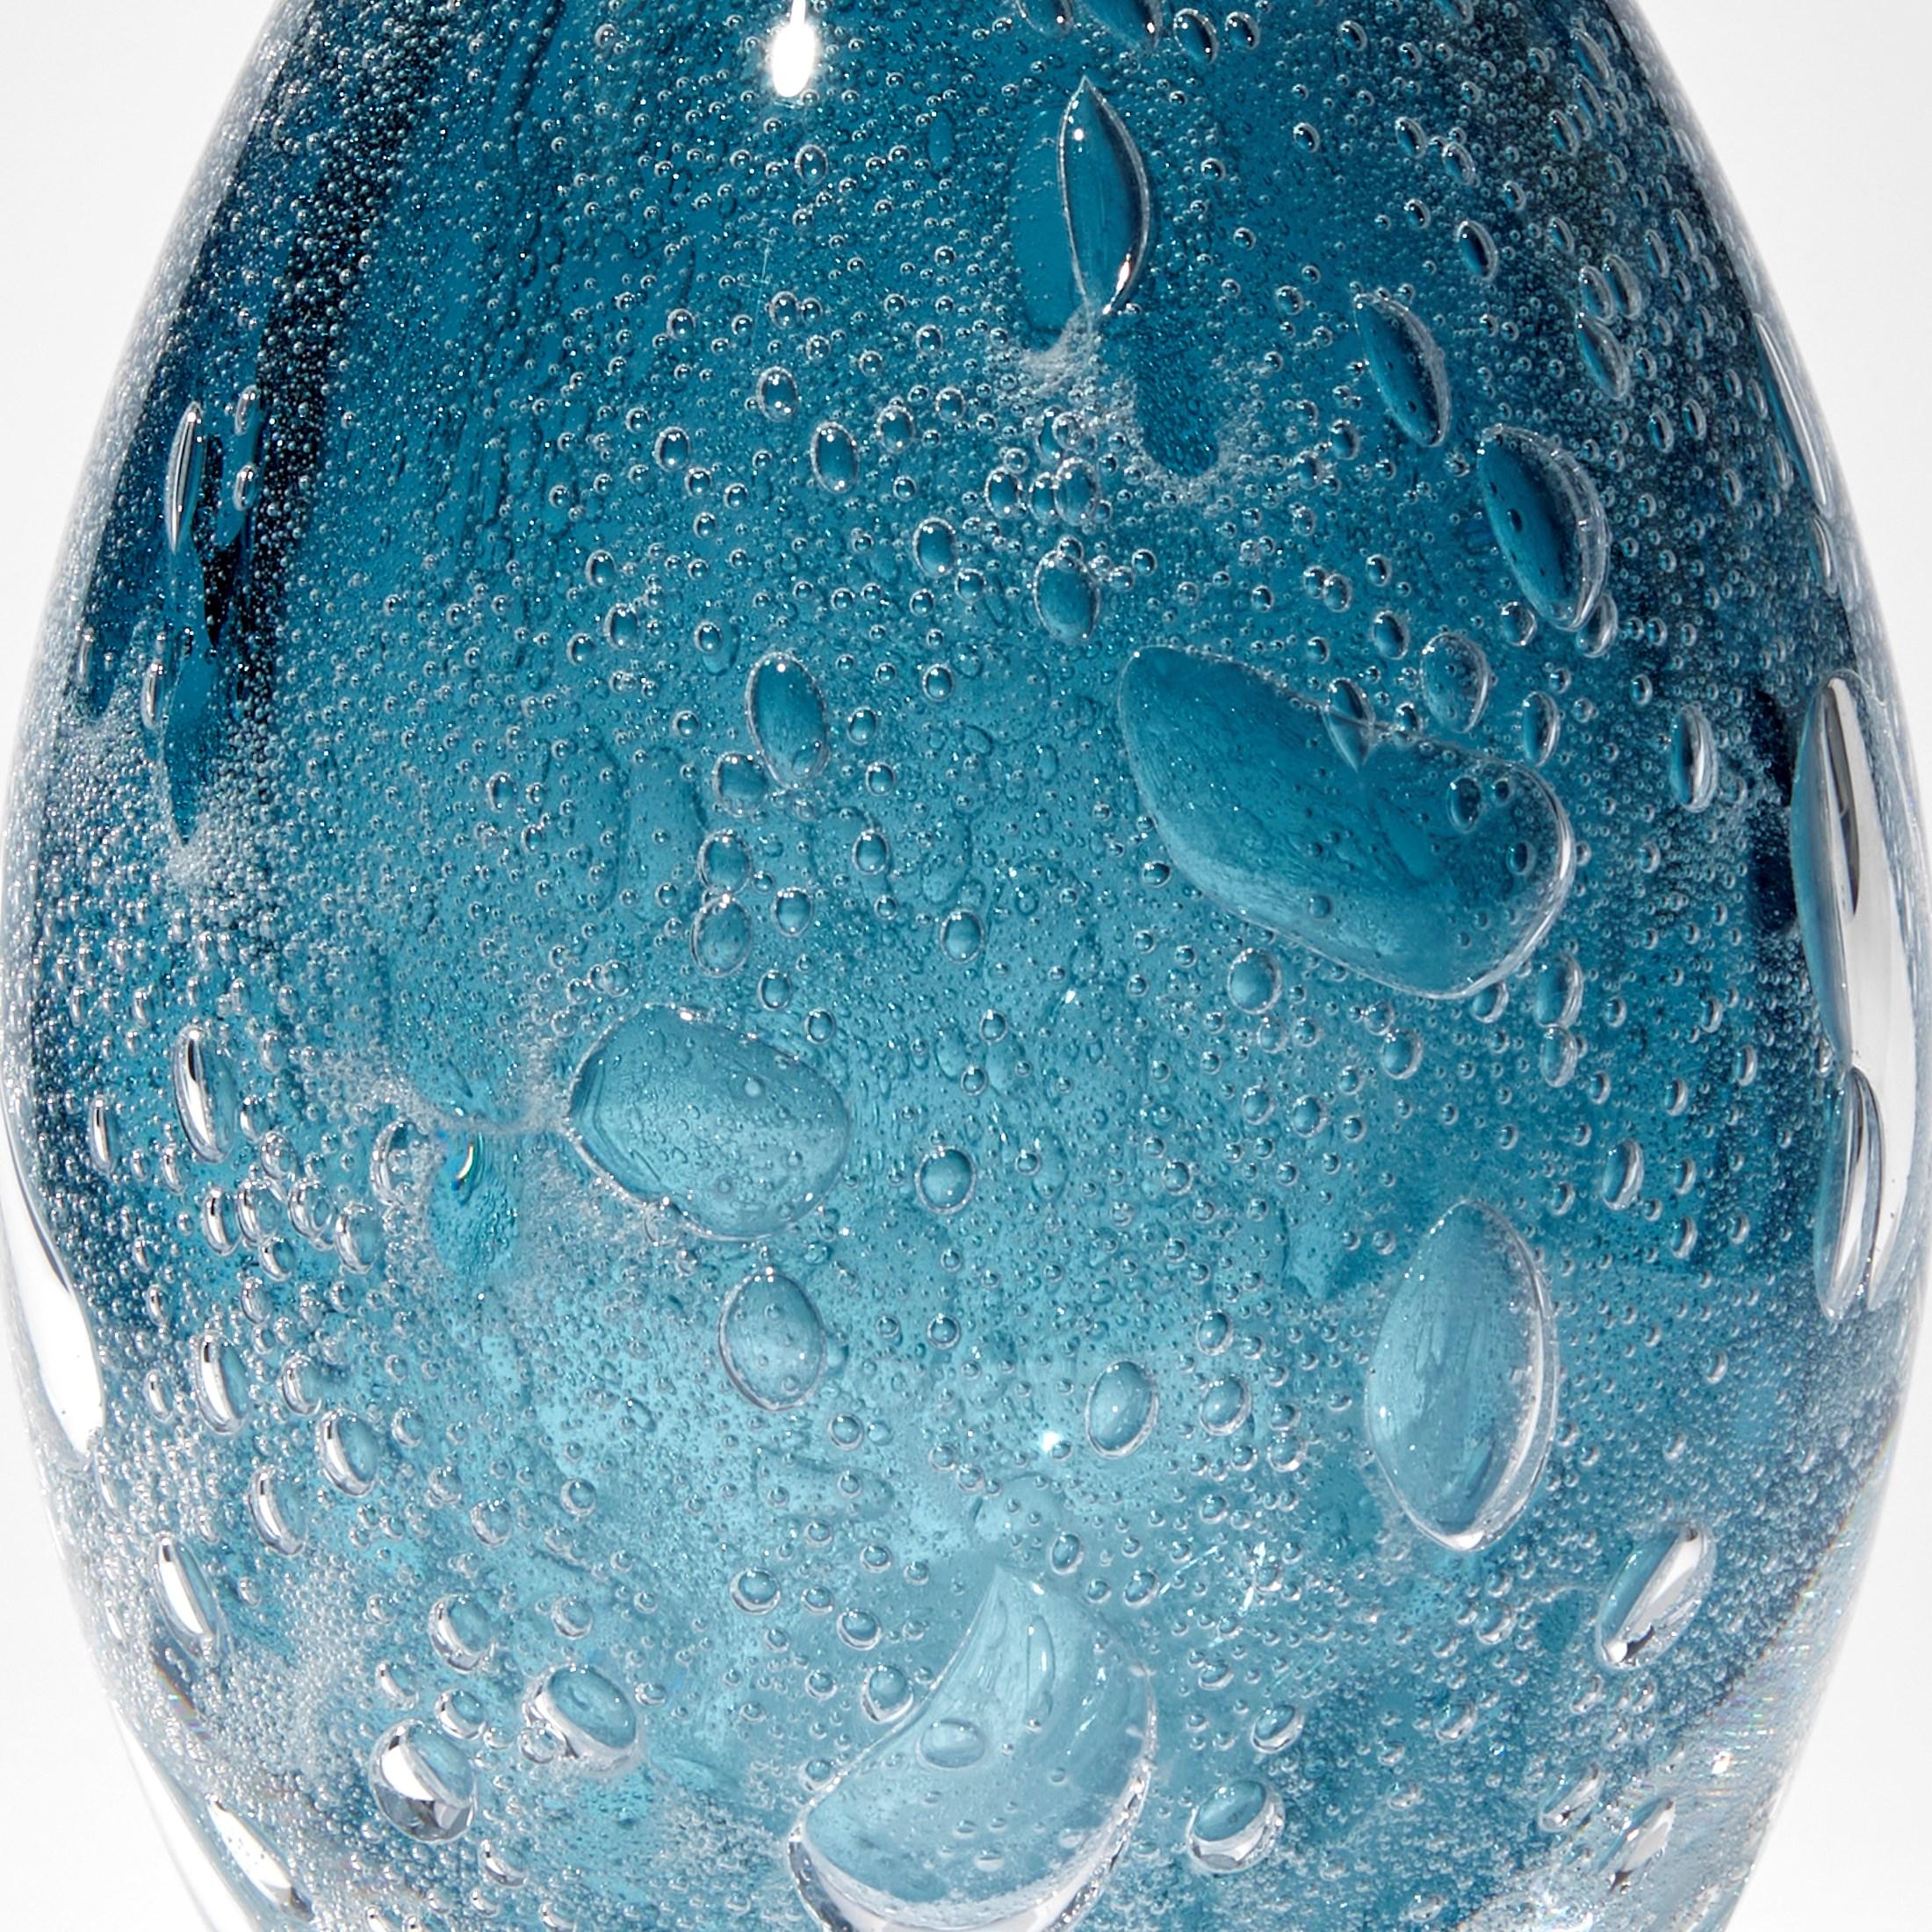 Organic Modern Turbulence in Steel Blue, a Rich Blue Glass Sculpture / Vessel by Anthony Scala